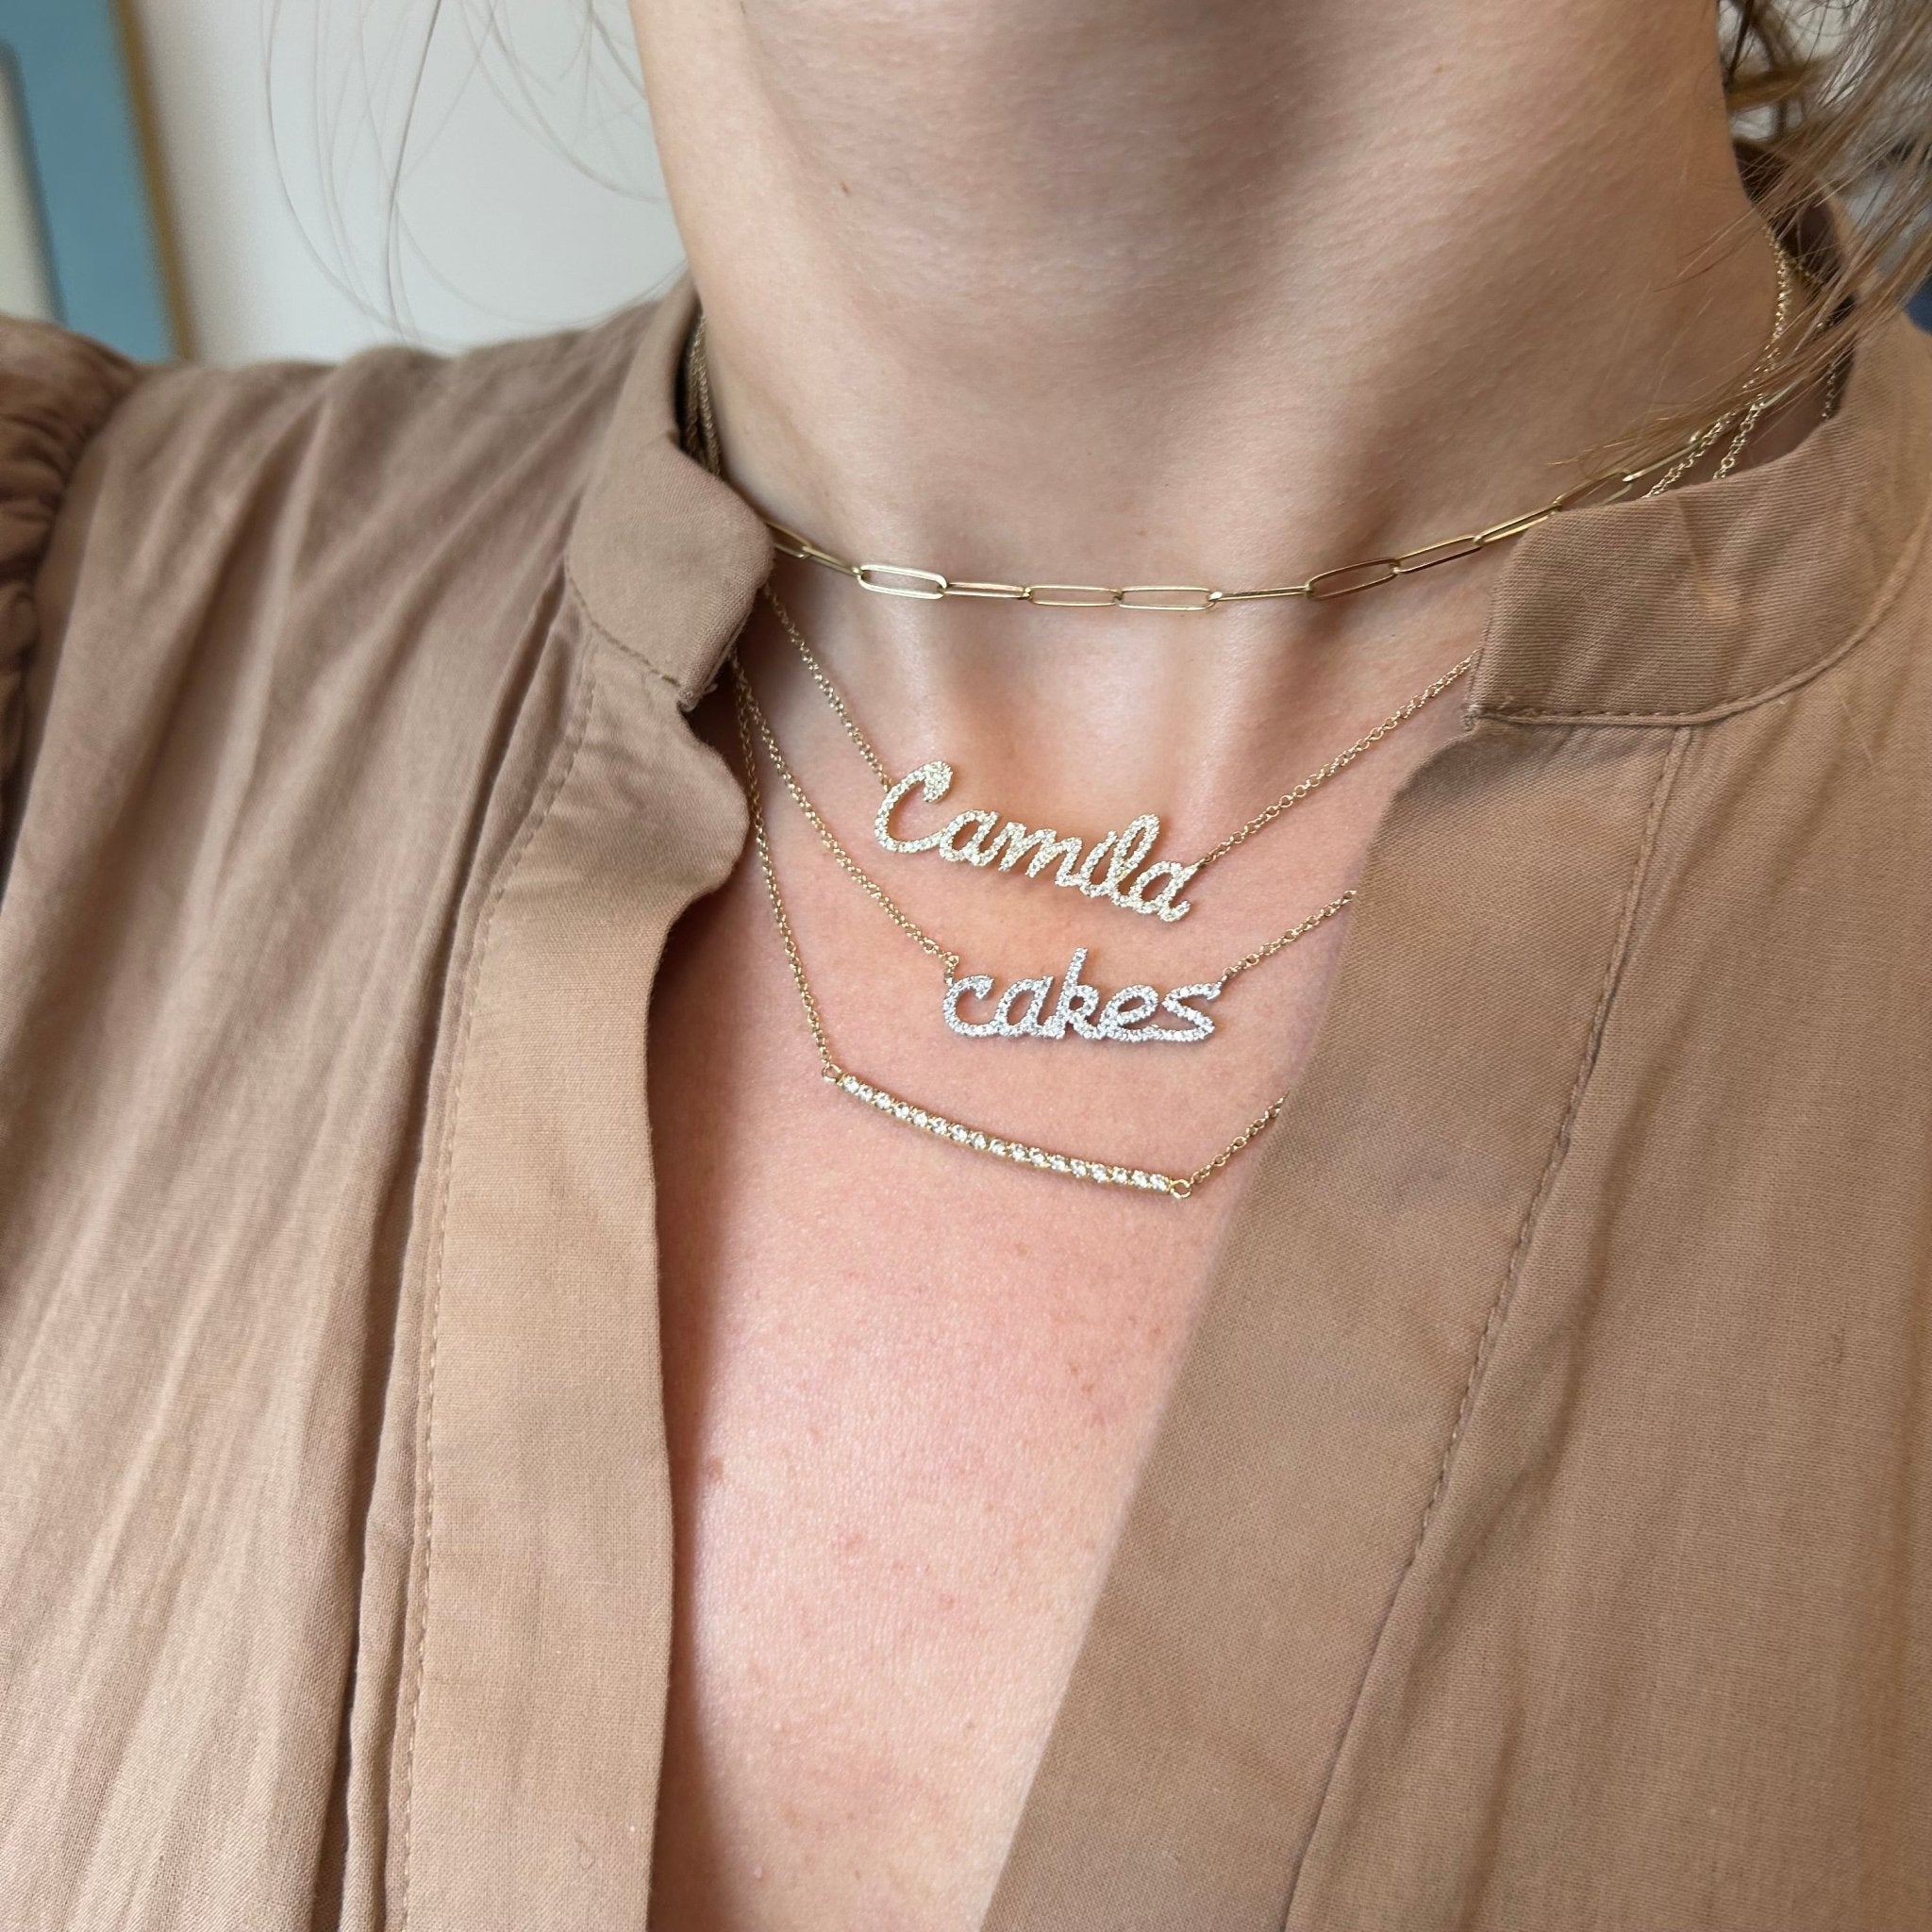 Why Do People Wear Necklaces with Their Own Name? – ROSOKI